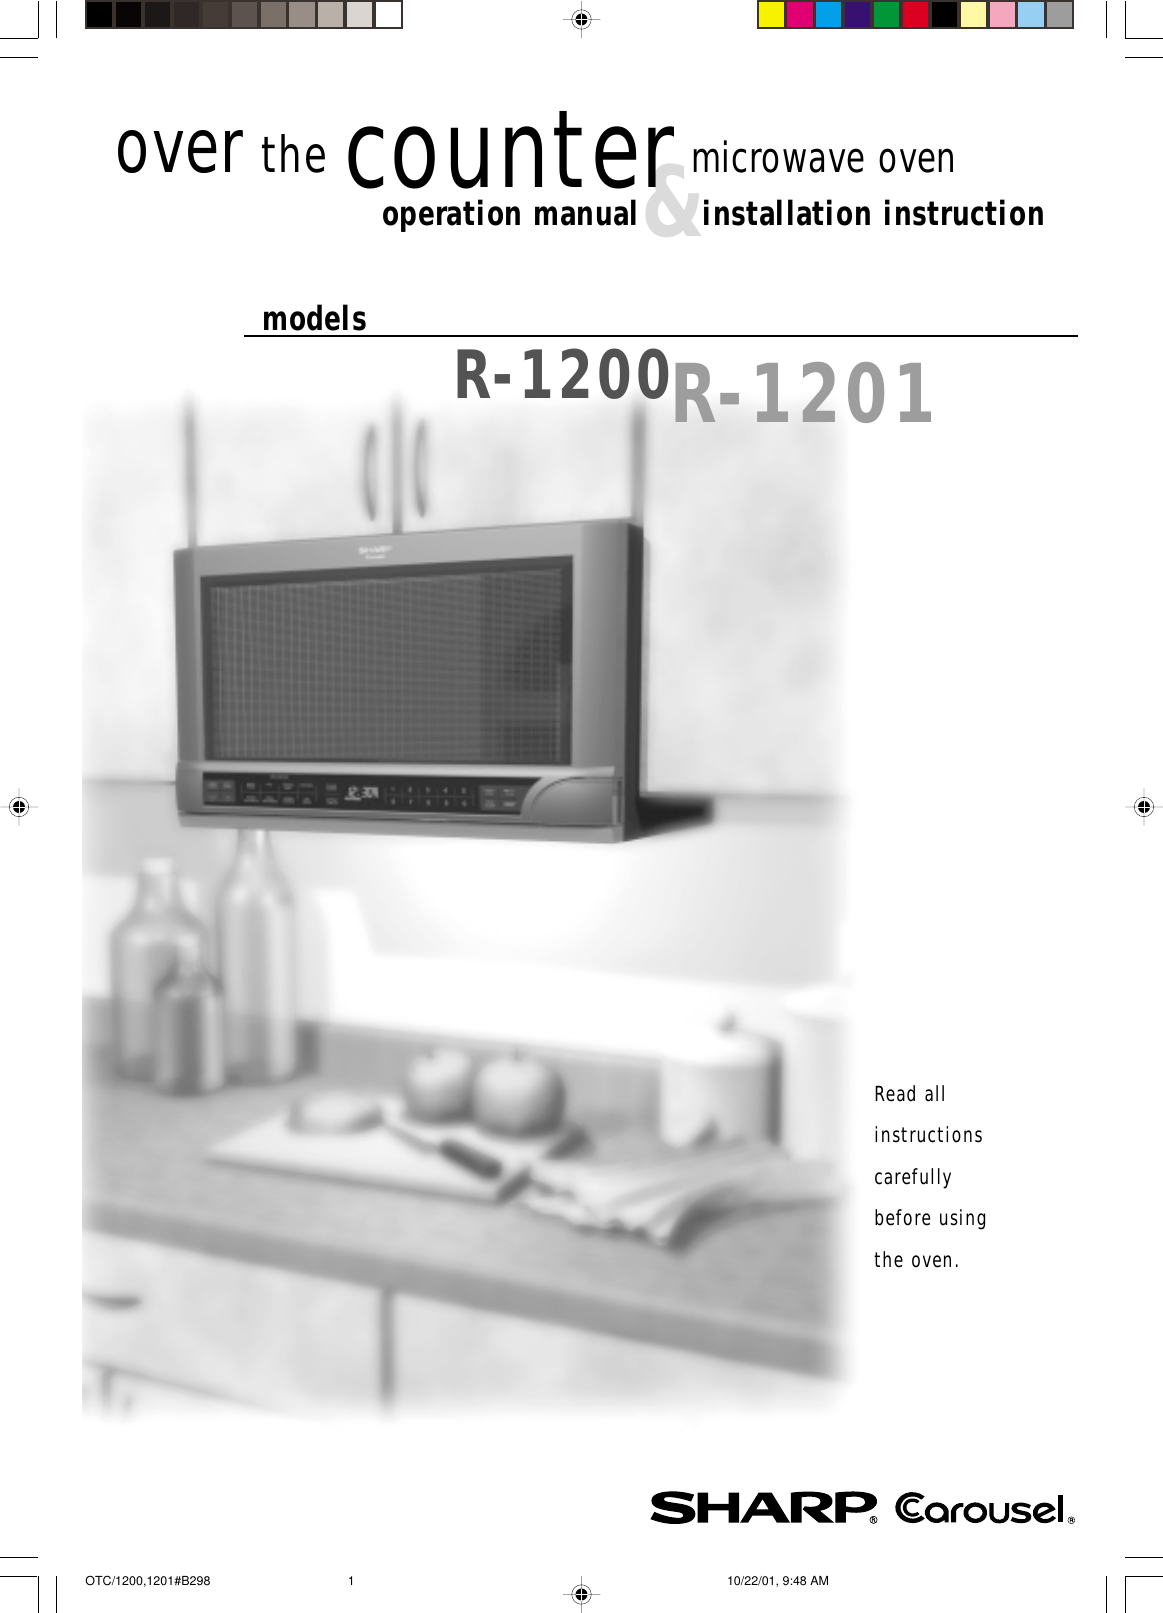 operation manual&amp;installation instructionR-1200Read allinstructionscarefullybefore usingthe oven.models R-1201over the counter microwave ovenOTC/1200,1201#B298 10/22/01, 9:48 AM1